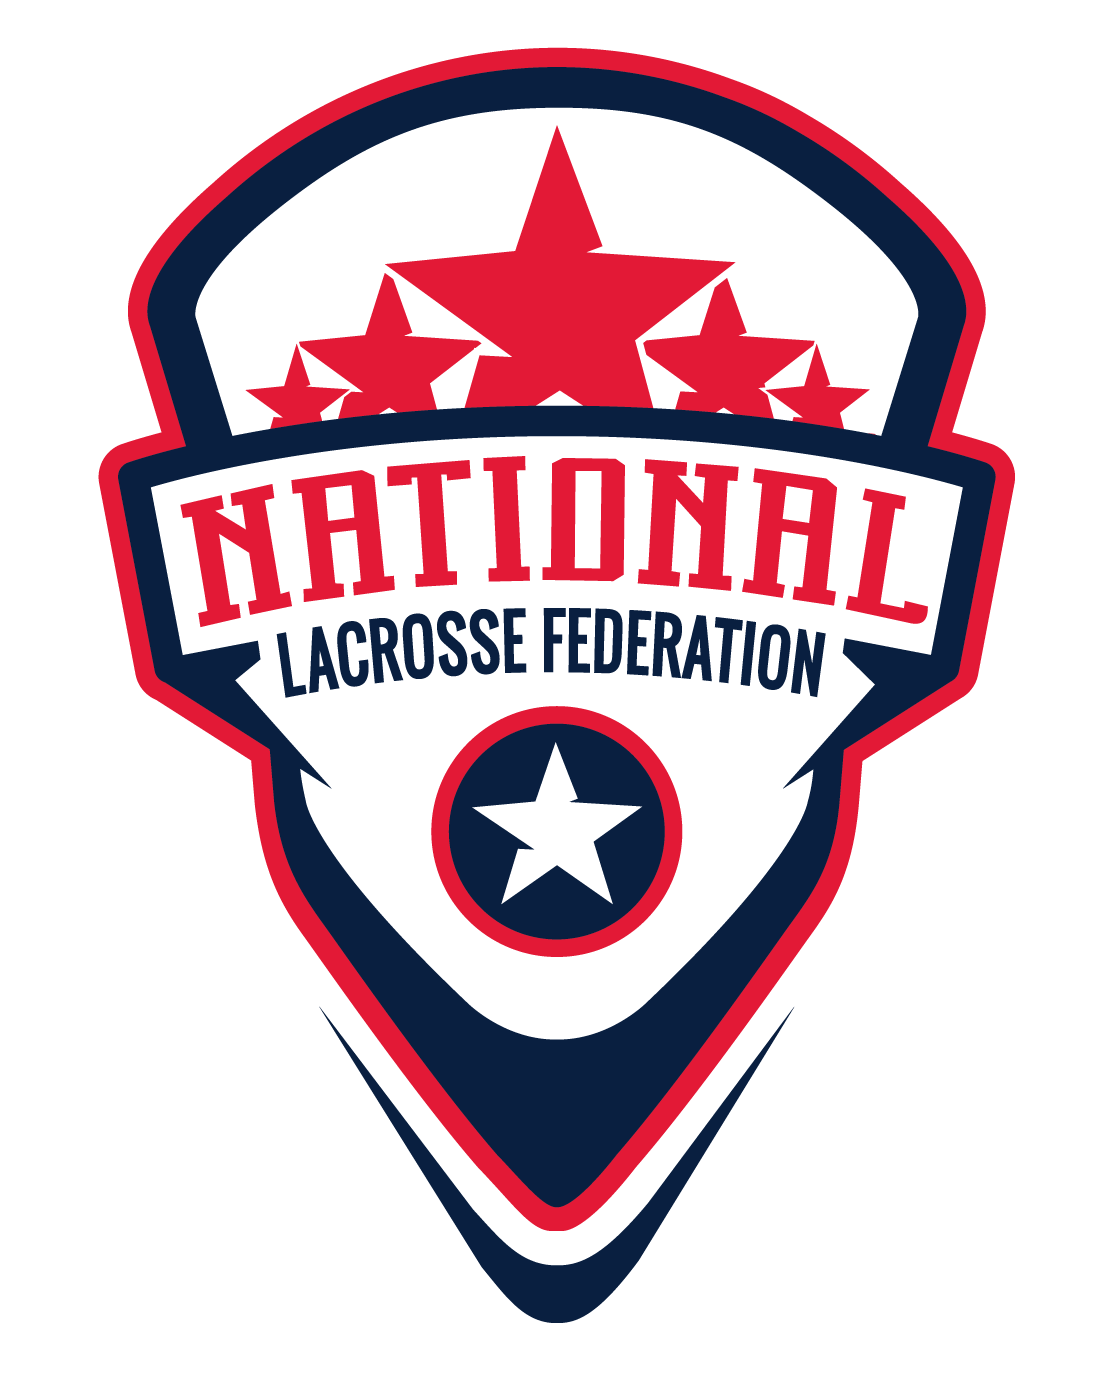 the National All Star Games Lacrosse Event is affiliated with the National Lacrosse Federation